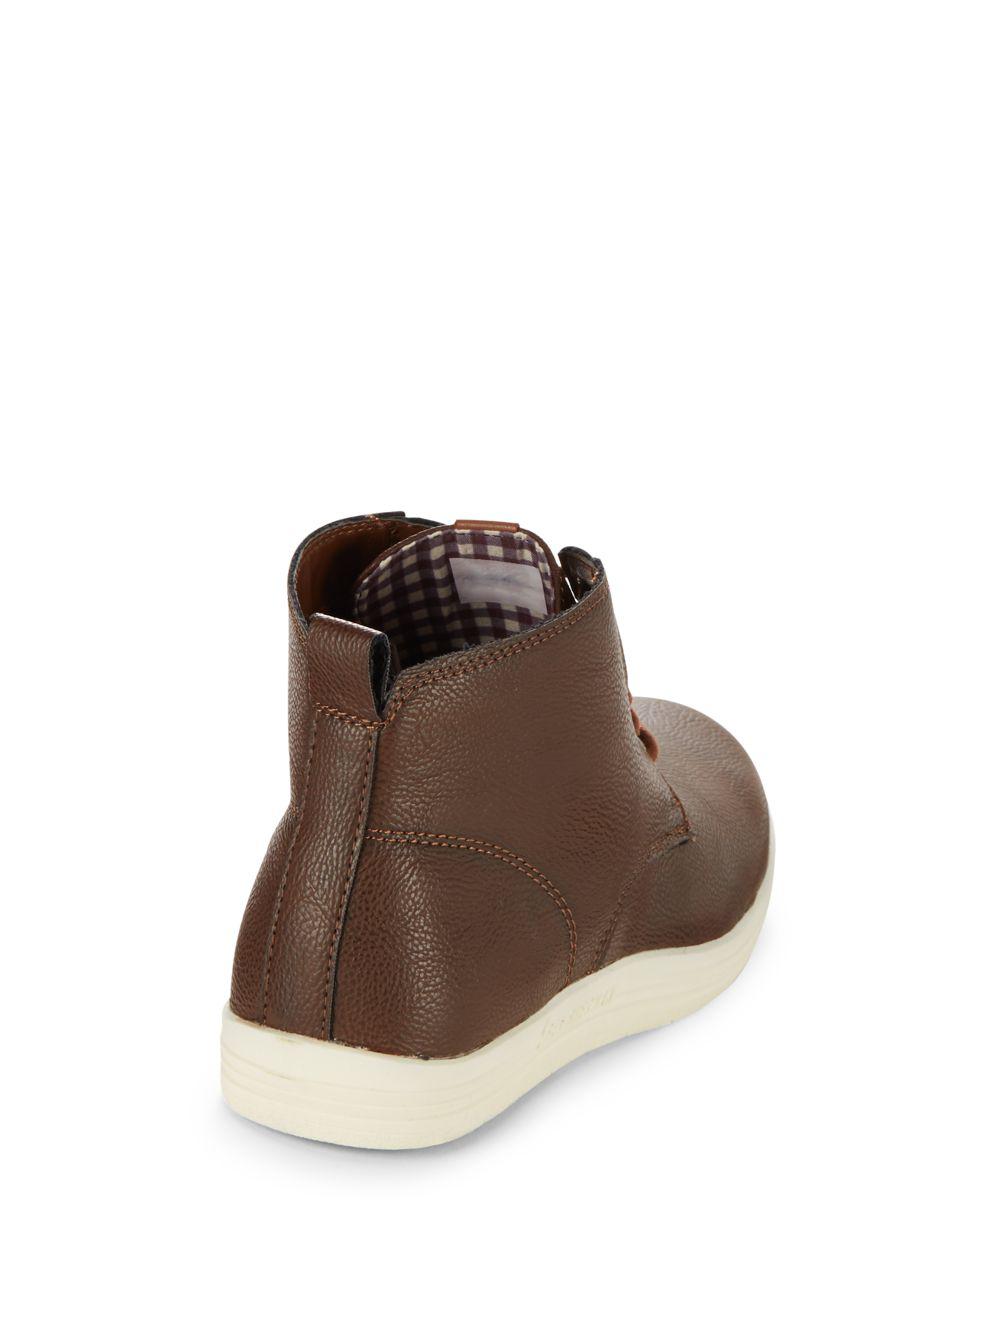 Ben Sherman Leather High-top Sneakers in Brown for Men - Lyst